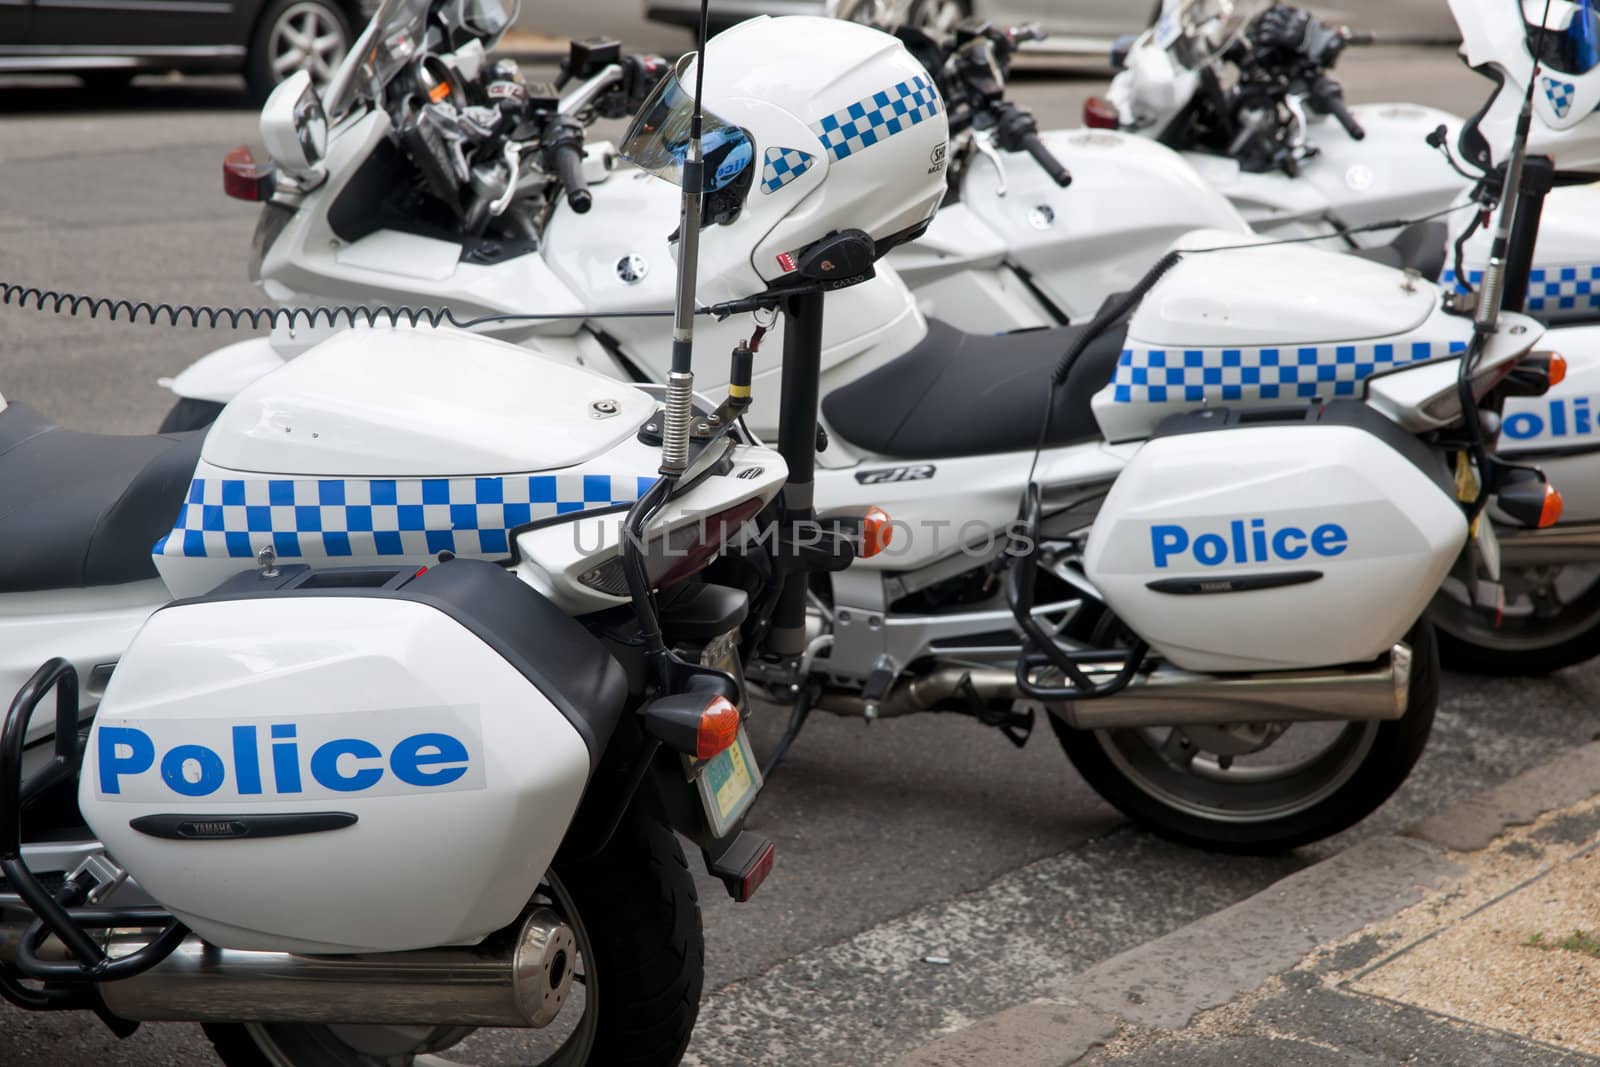 Police motorcycles, parked with helmets on post at rear.